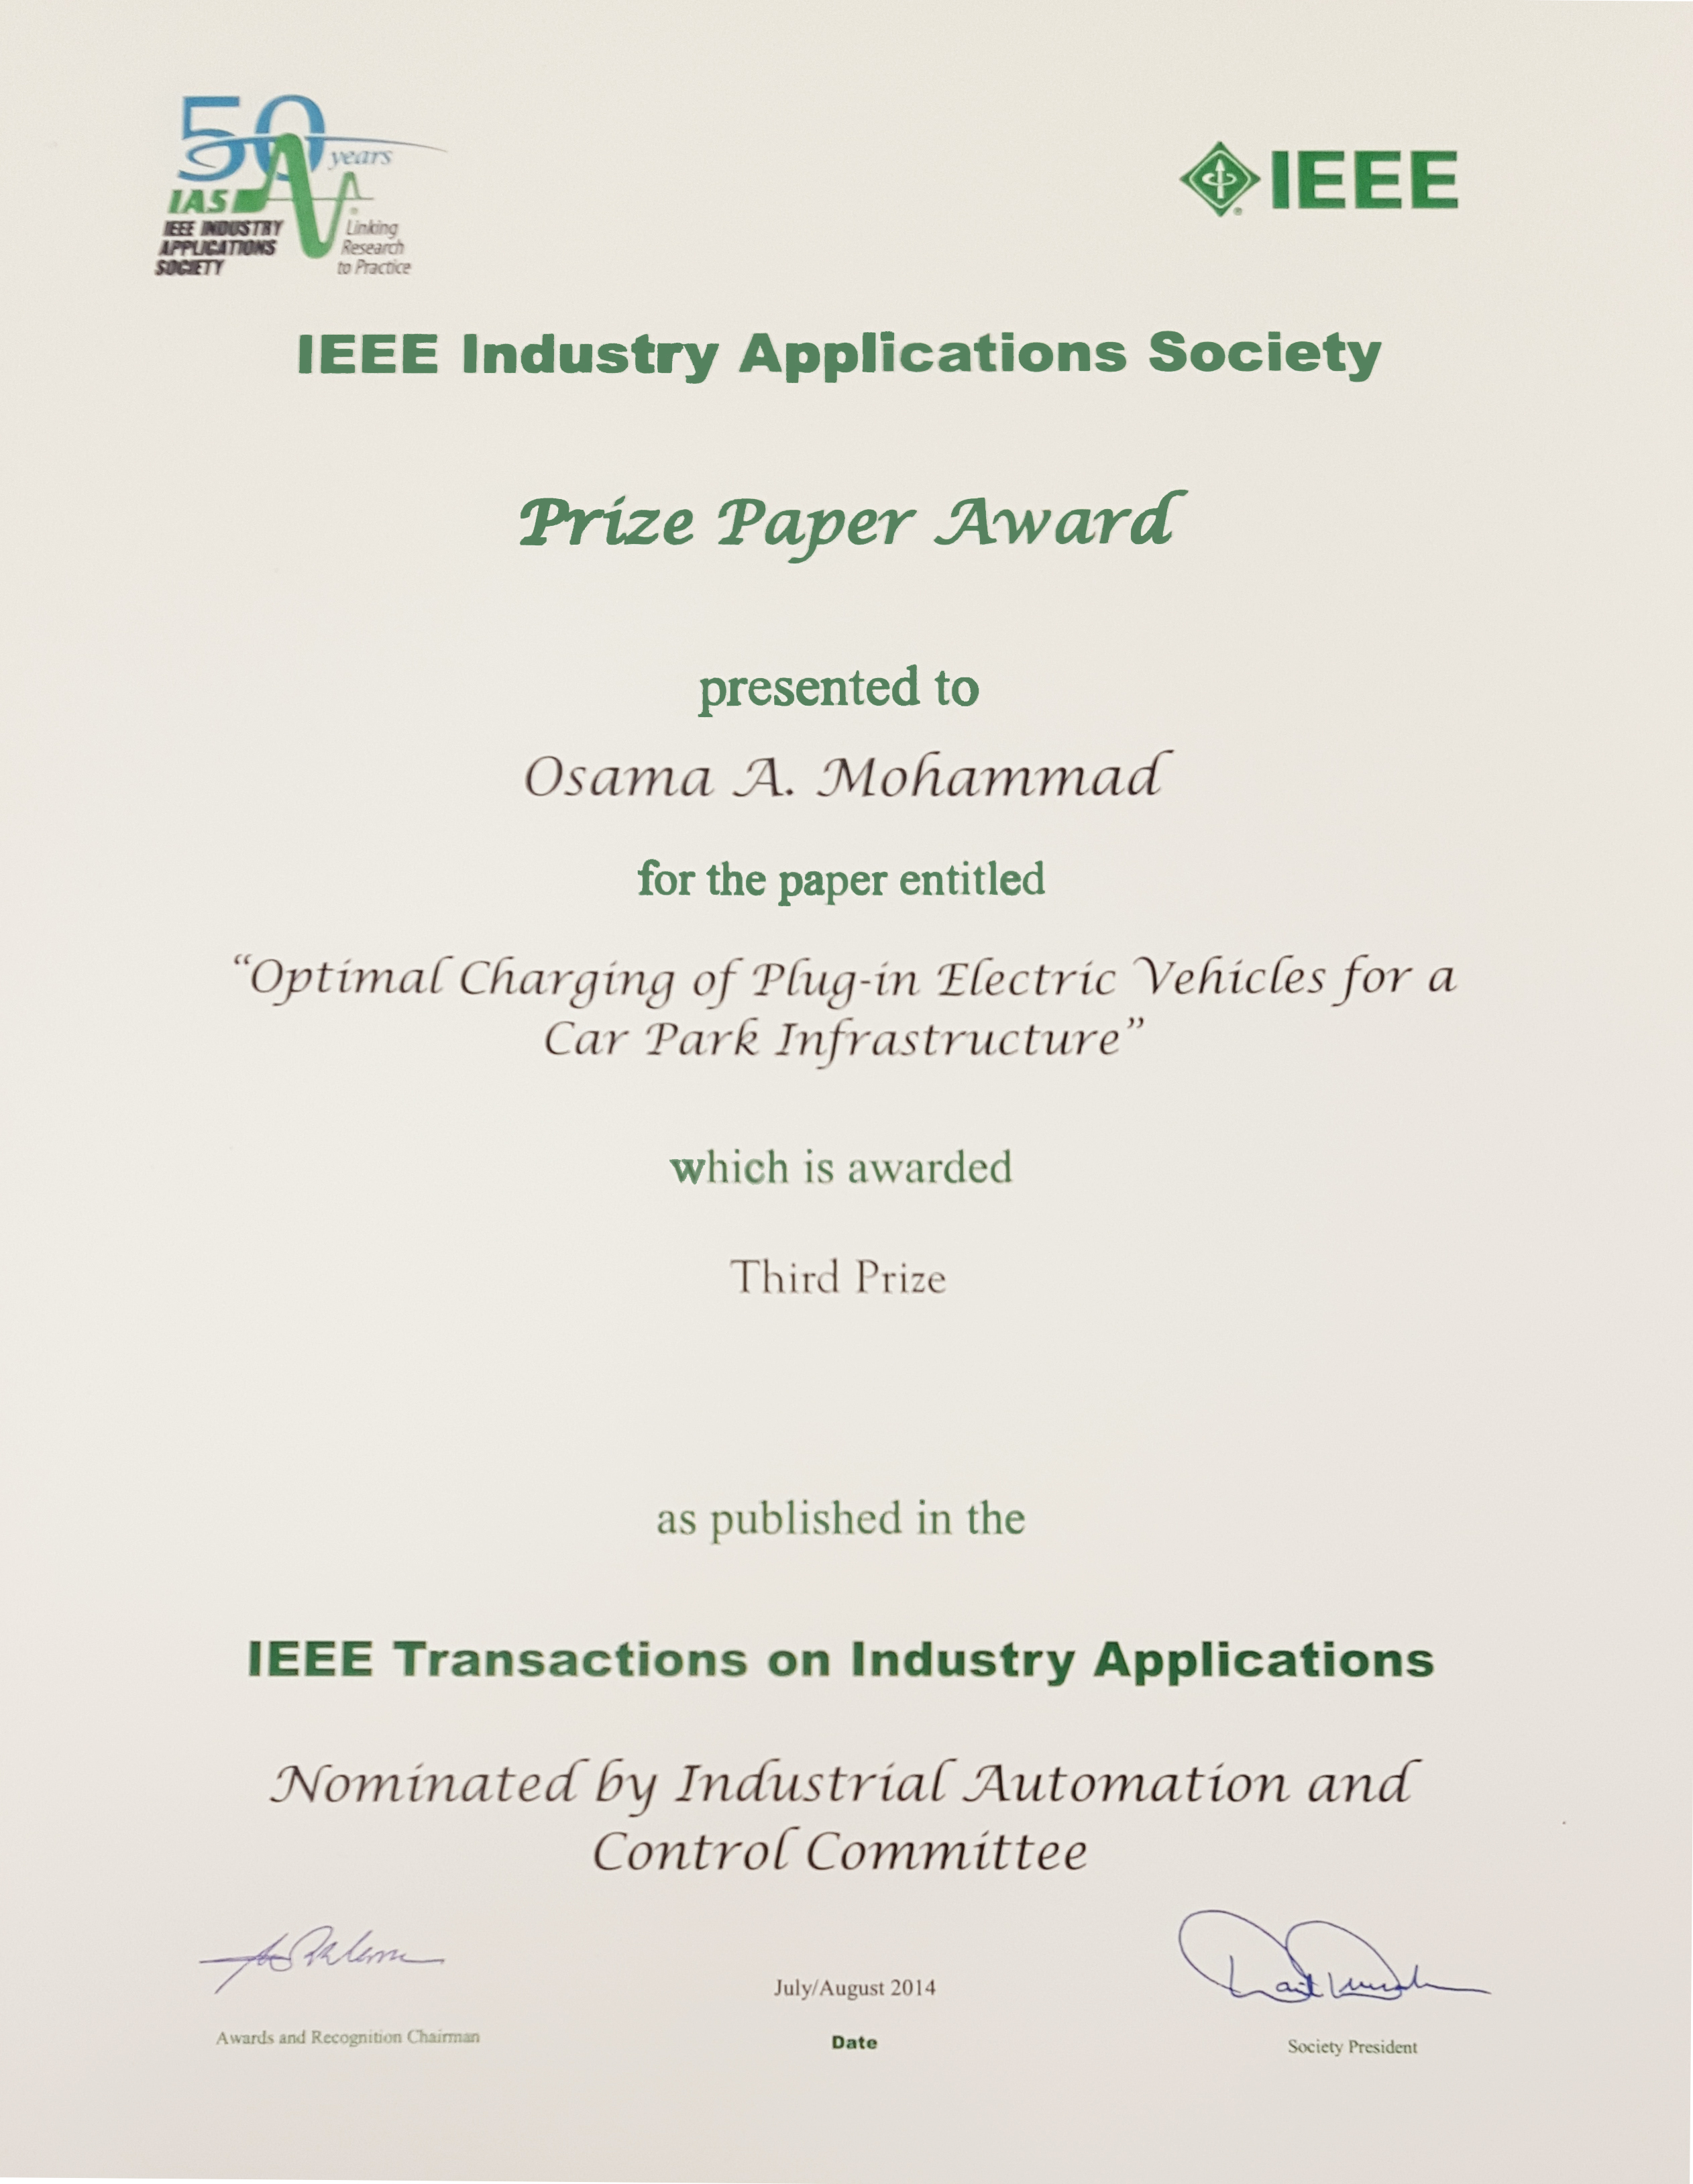 Dr. Tan Ma and Prof. Mohammed received the Prize paper Award from IEEE Industry Applications Society